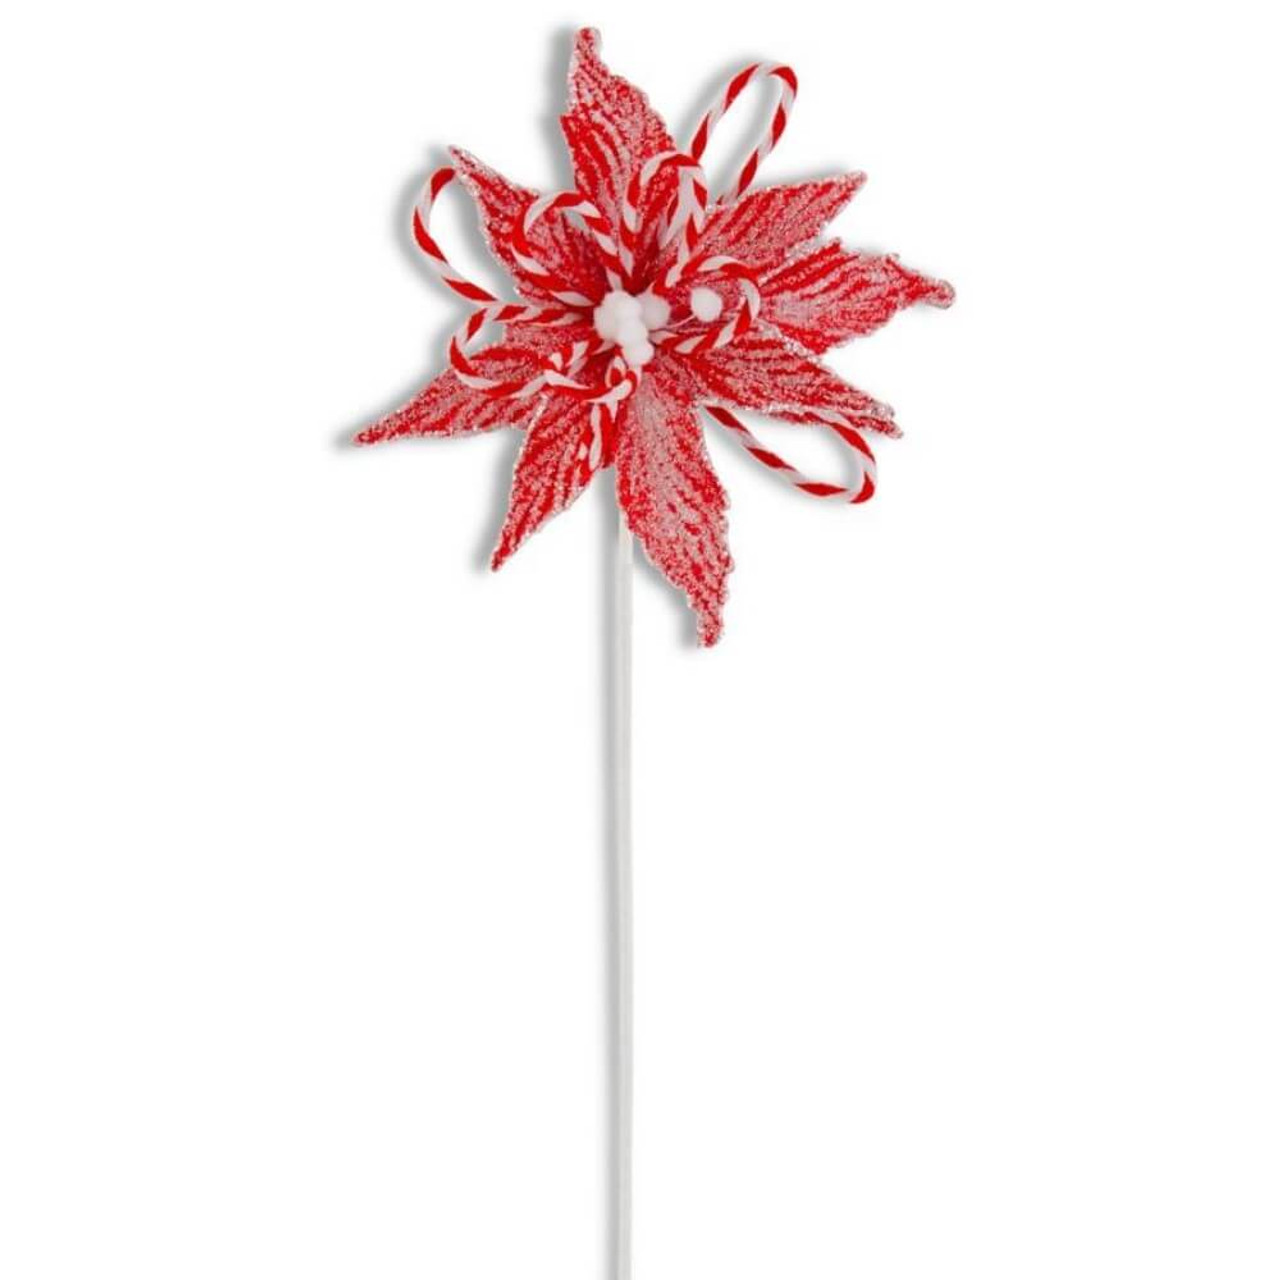 K & K Interiors Snowy Glittered Red Poinsettia with Striped Accents